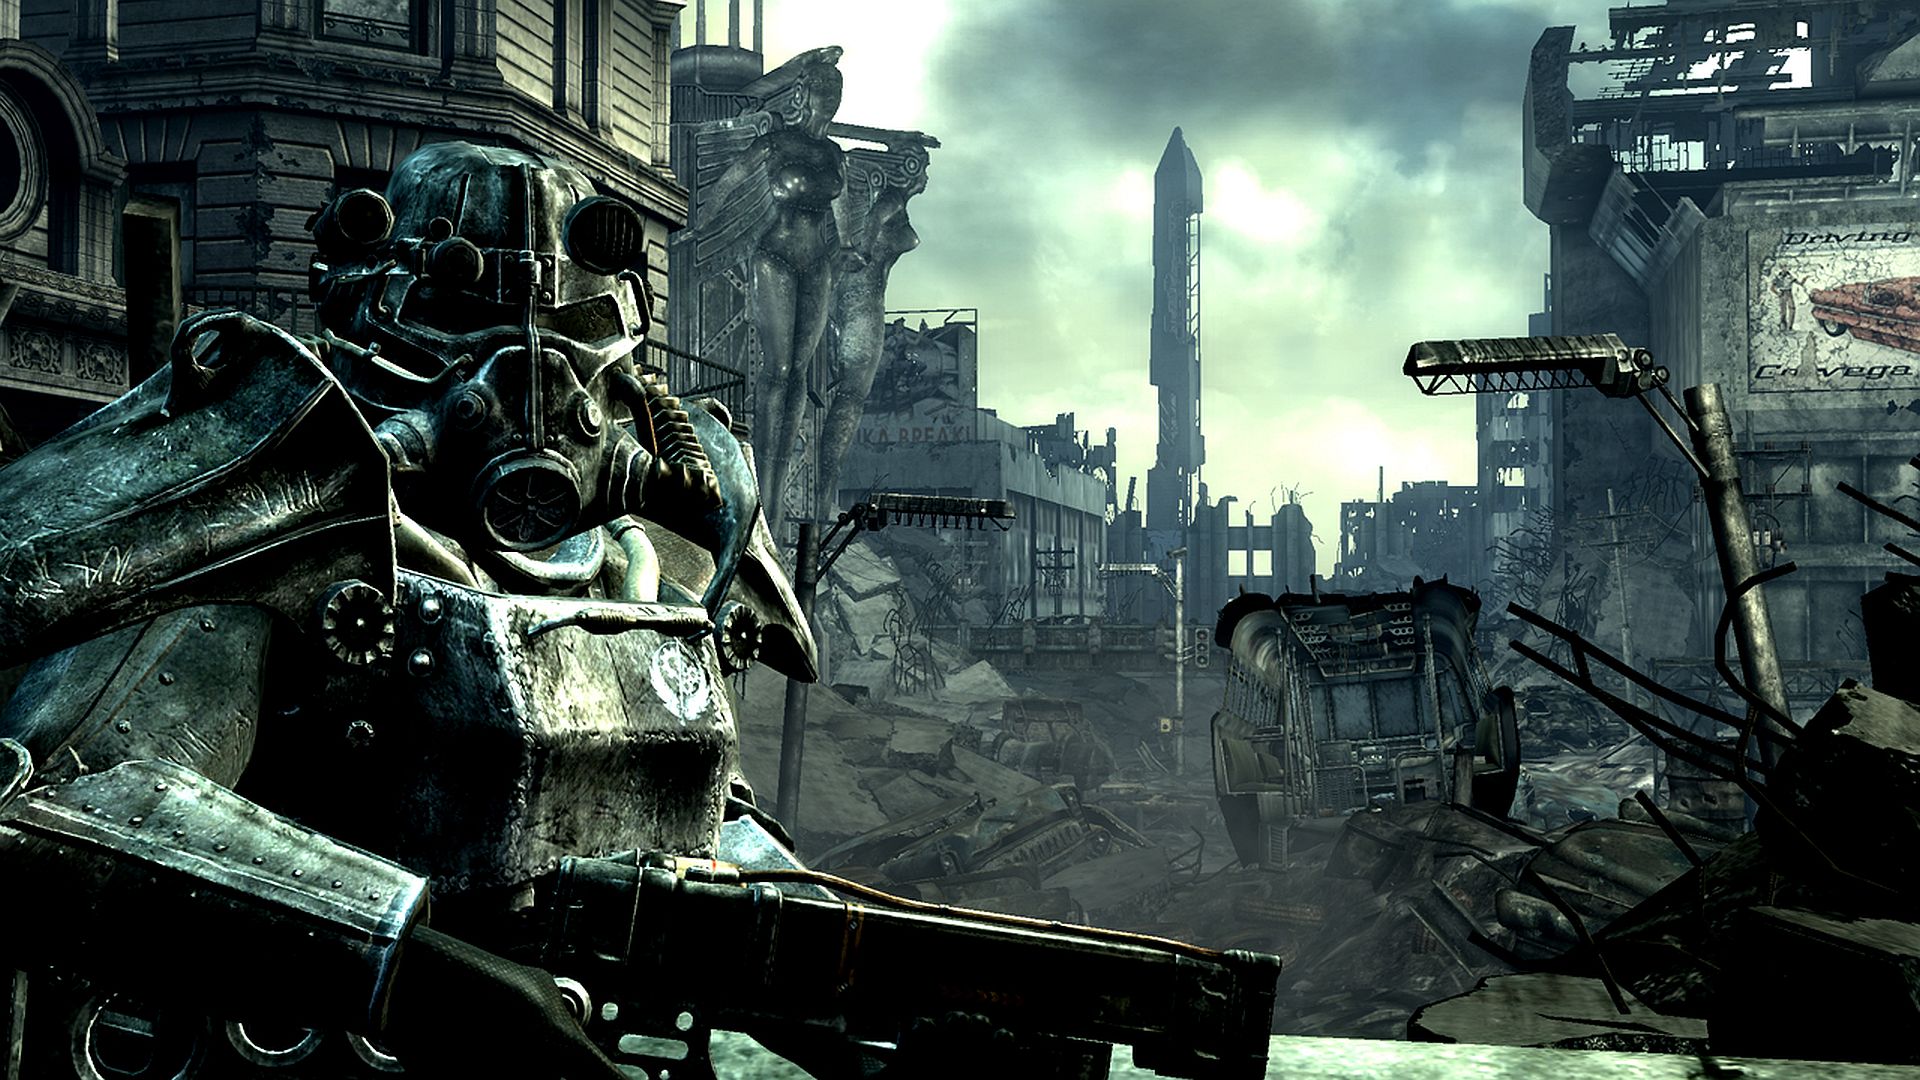 Fallout 3 – bringing families together, one nuke at a time